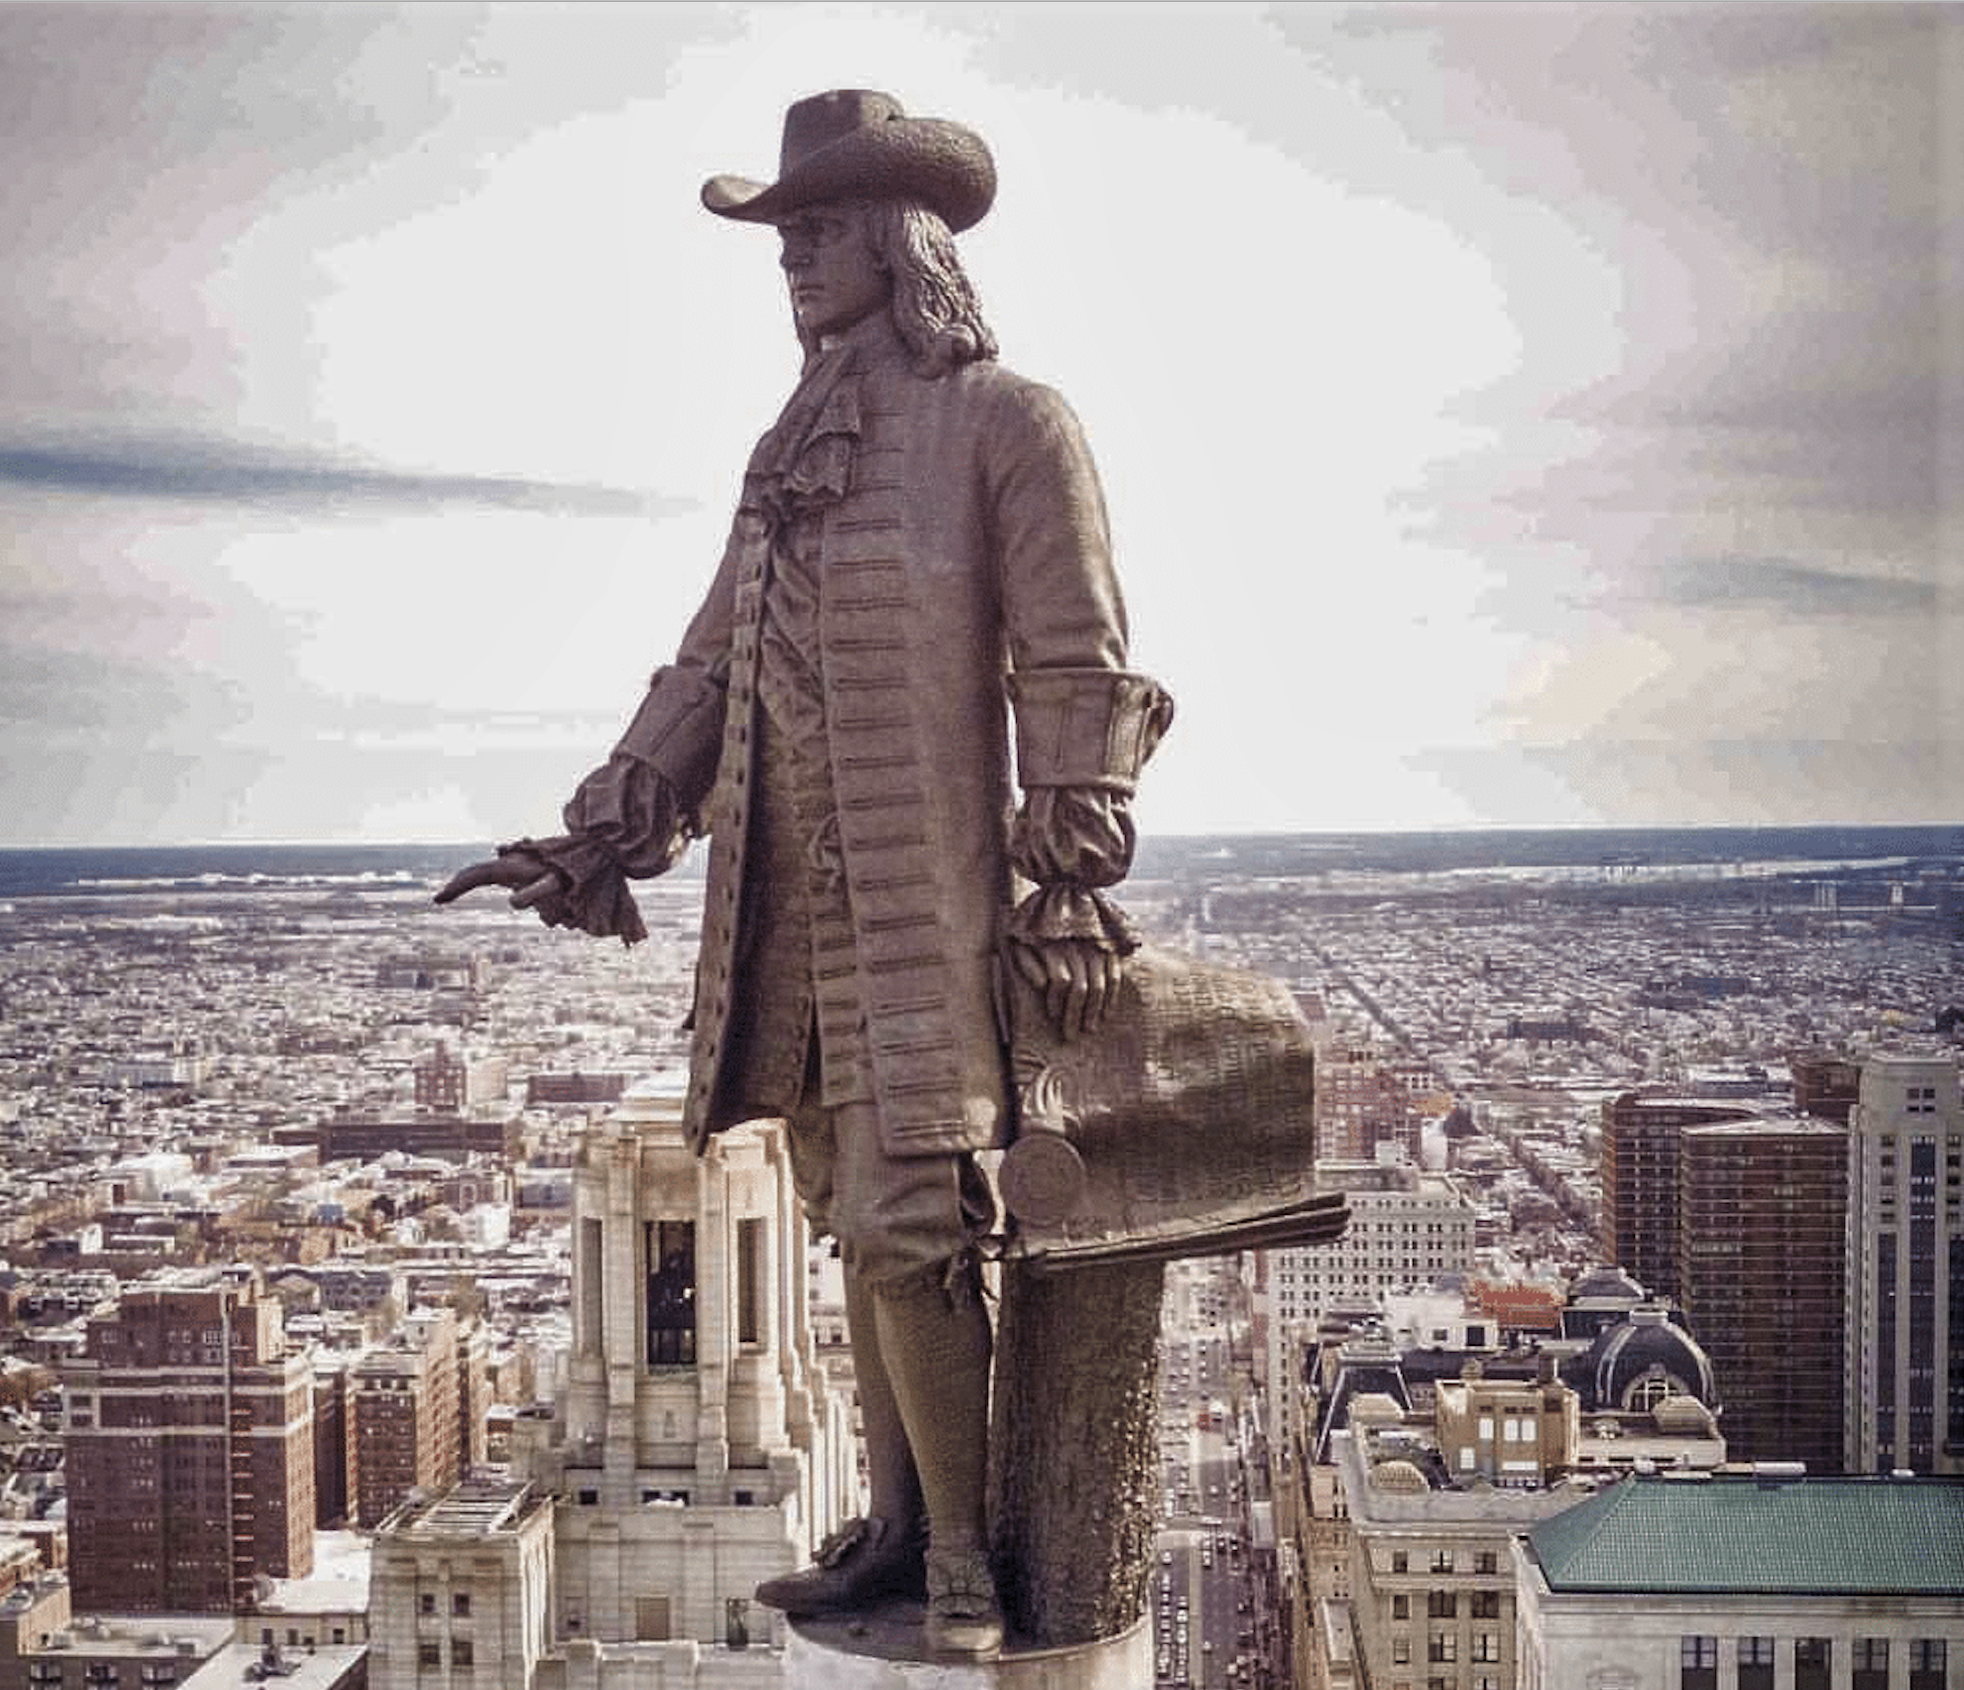 William Penn statue on top of building in Philadelphia, PA USA